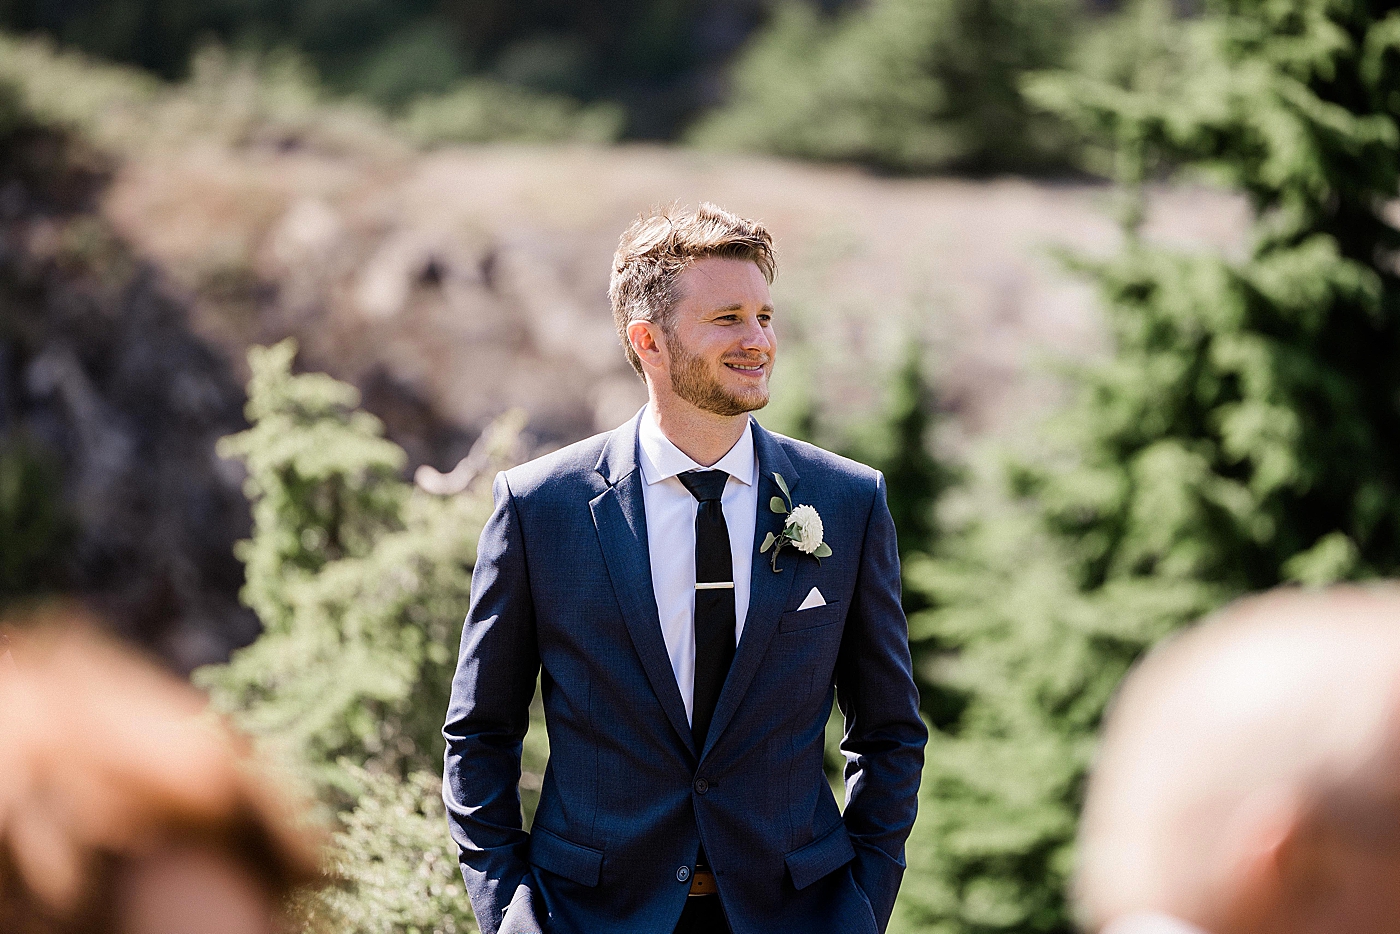 Groom watching the bride walk down the path to elopement. Photo by Megan Montalvo Photography.